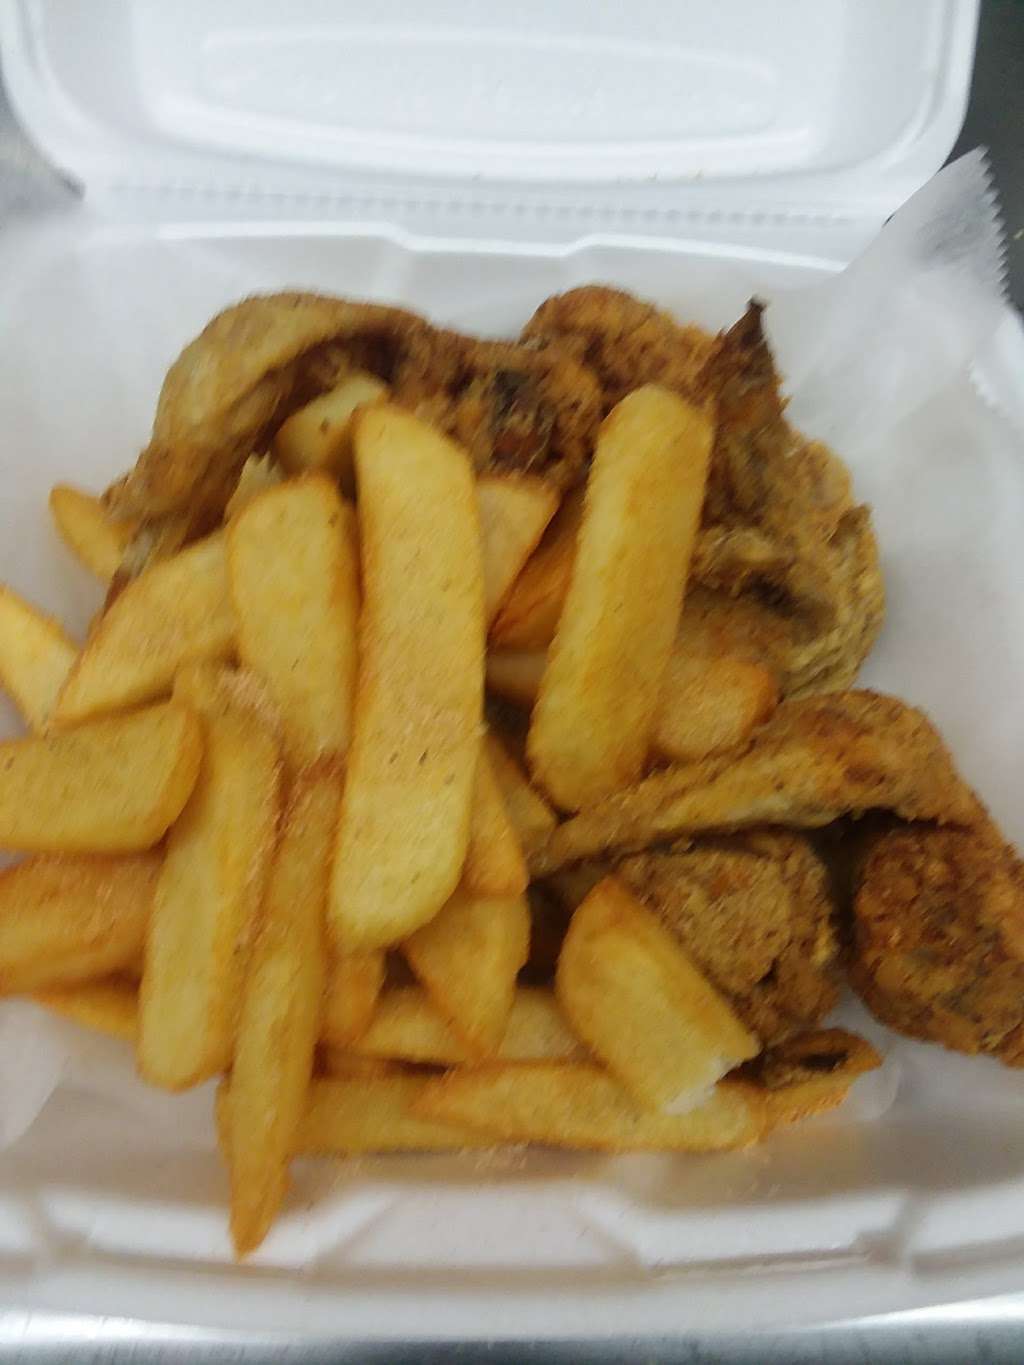 Soul Delishaus | 617 S Marlyn Ave, Essex, MD 21221 | Phone: (443) 721-2391